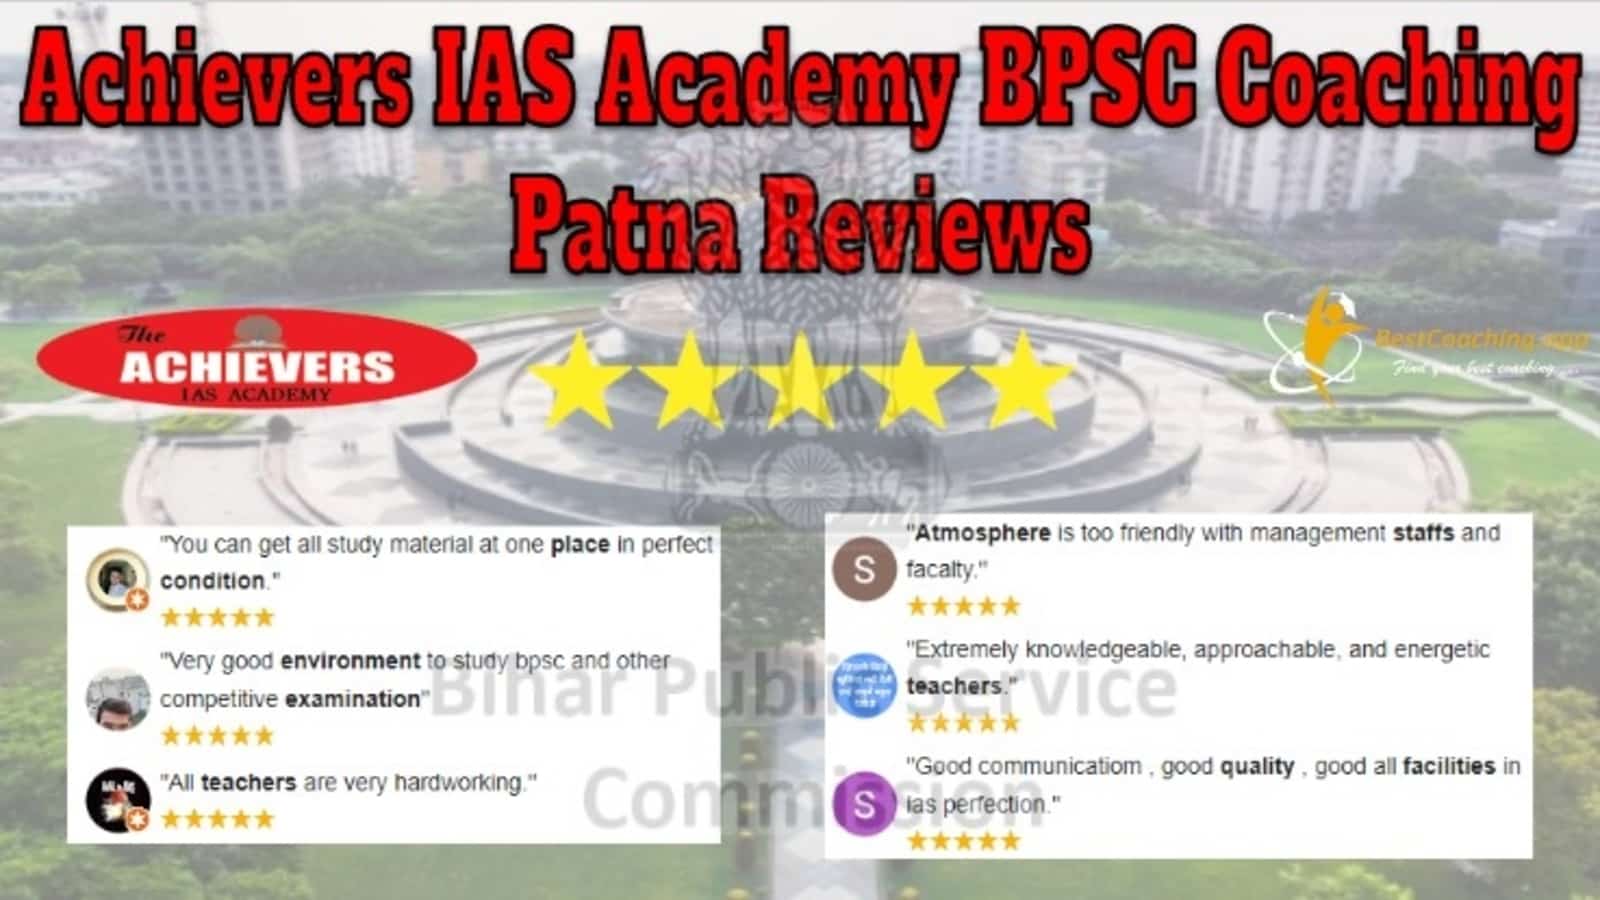 Achievers IAS Academy BPSC Coaching in Patna Reviews